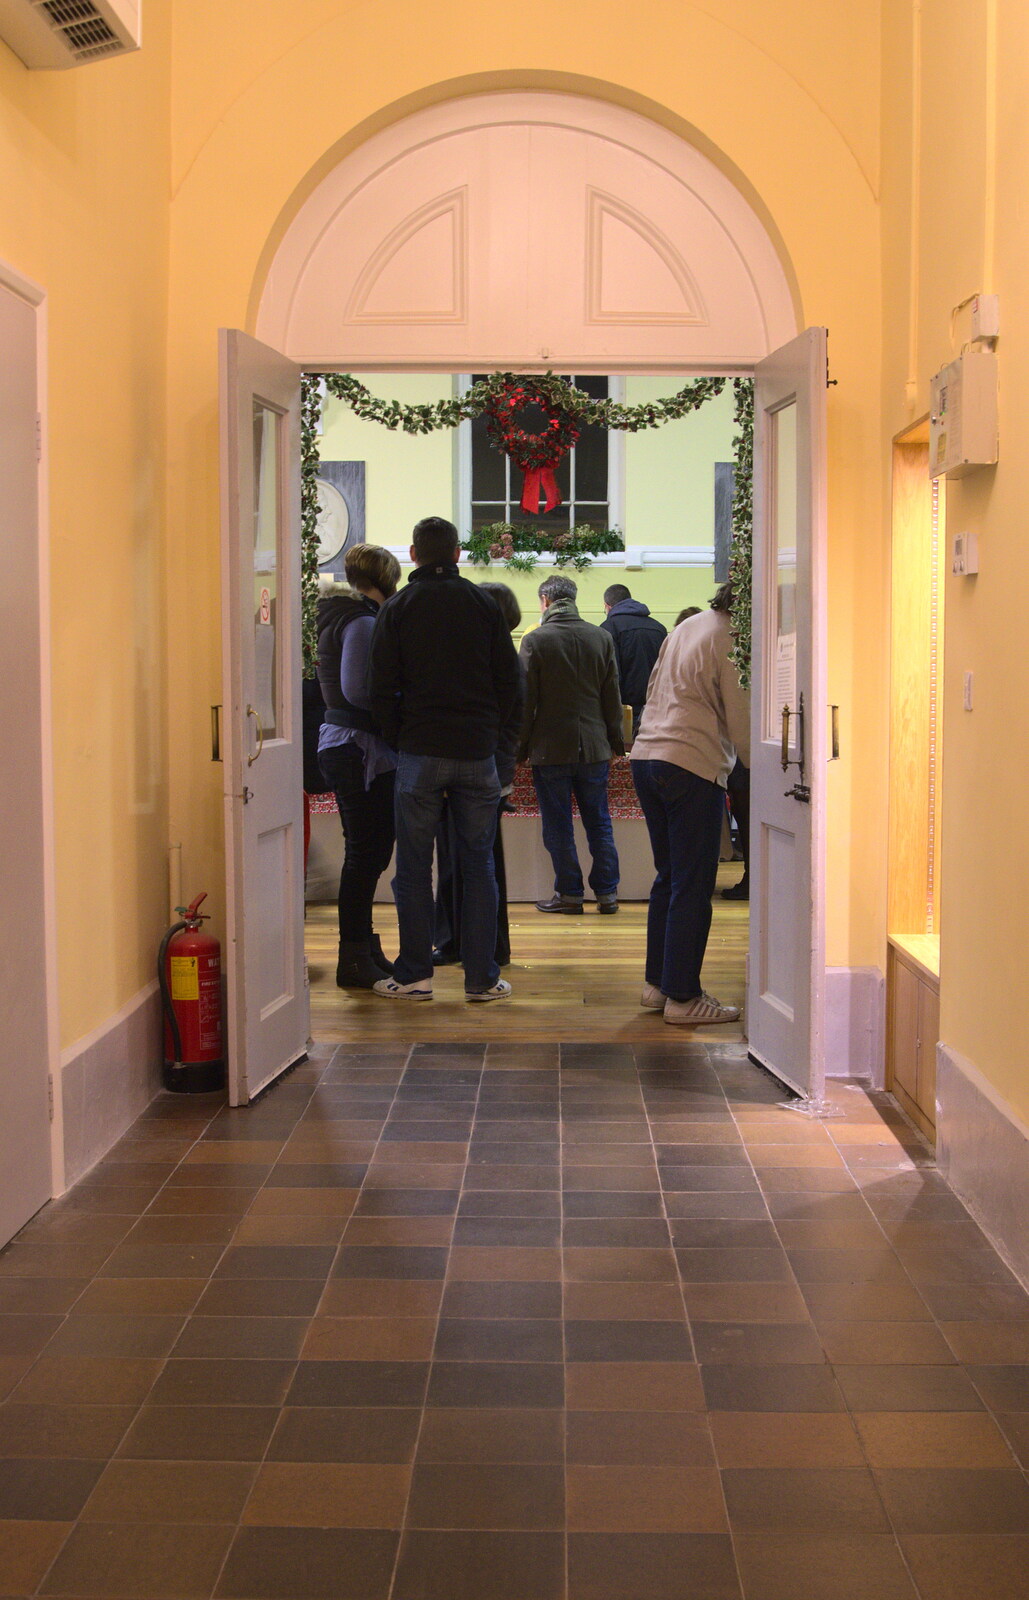 The town hall's entrance corridor from The Eye Christmas Lights, and a Trip to Norwich, Norfolk - 4th December 2015